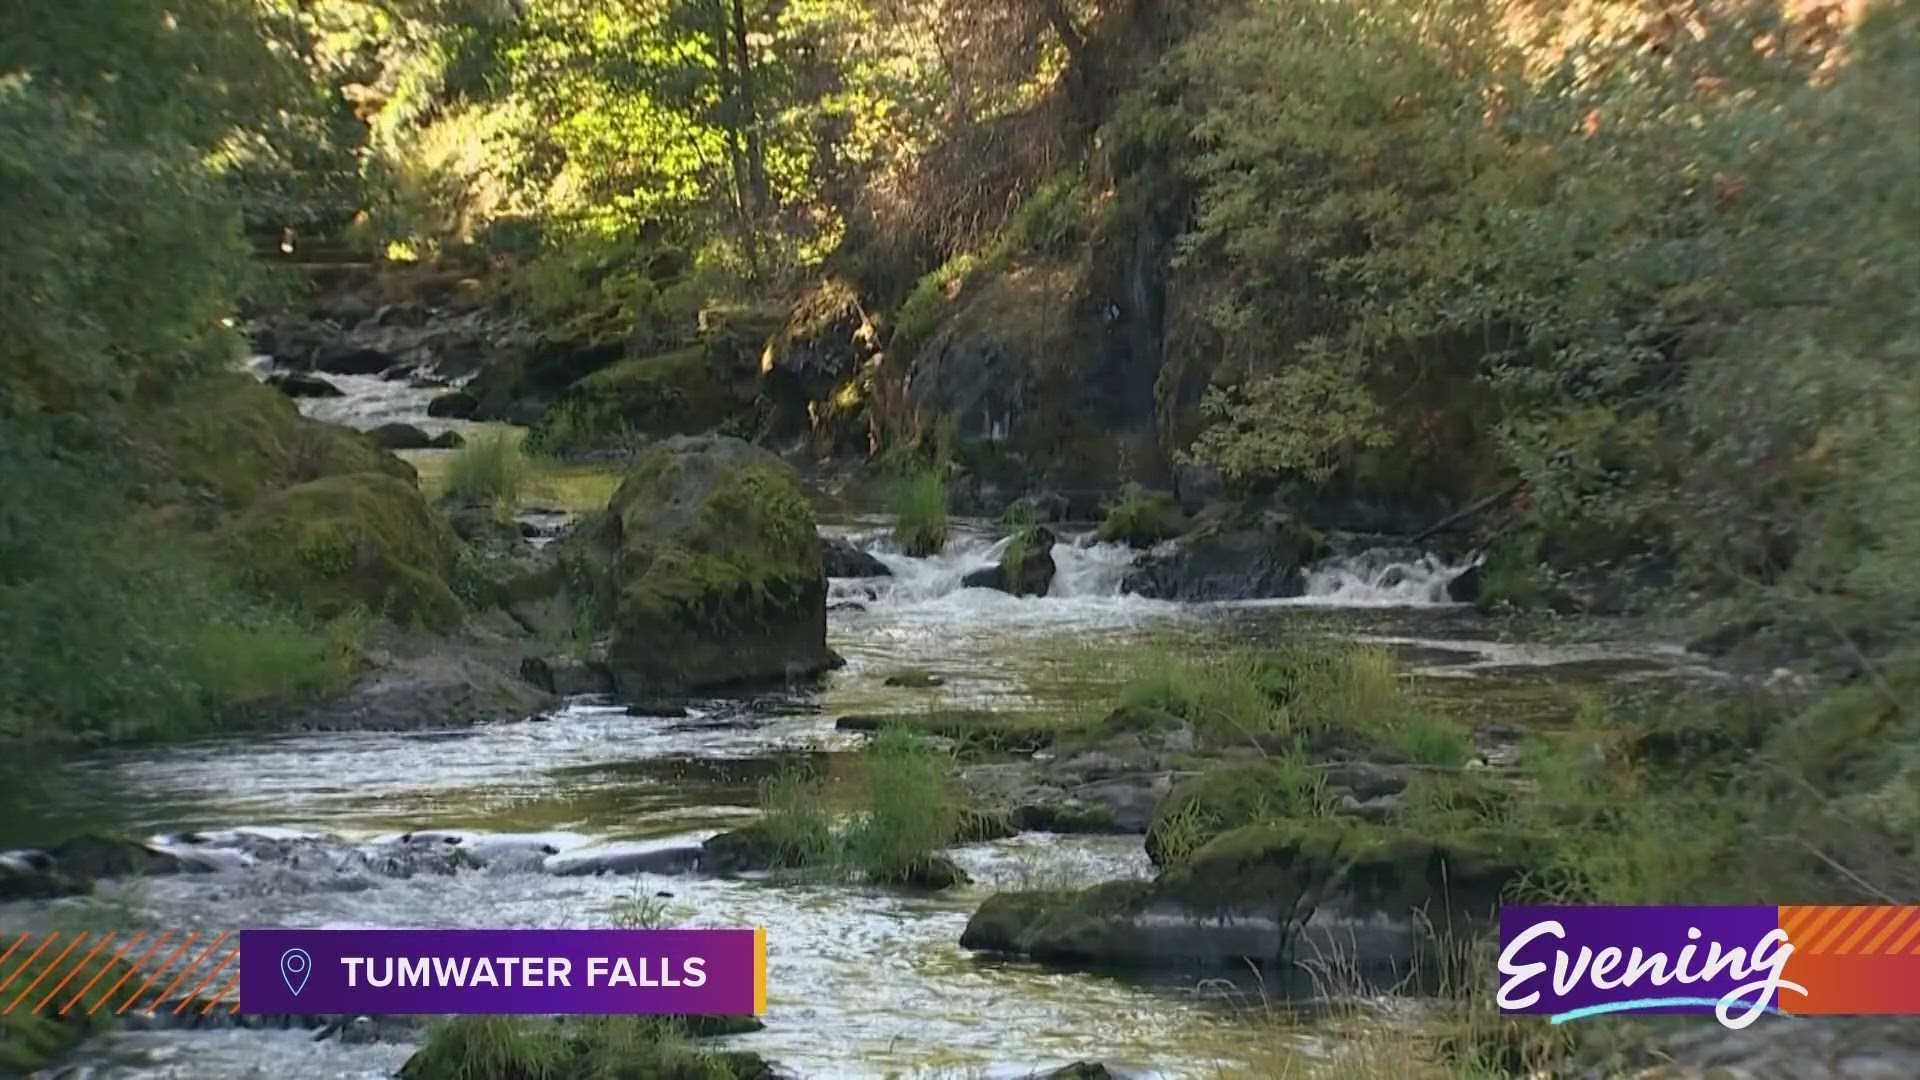 With more than 3,000 falls, the Evergreen State should probably be called the Waterfall State.